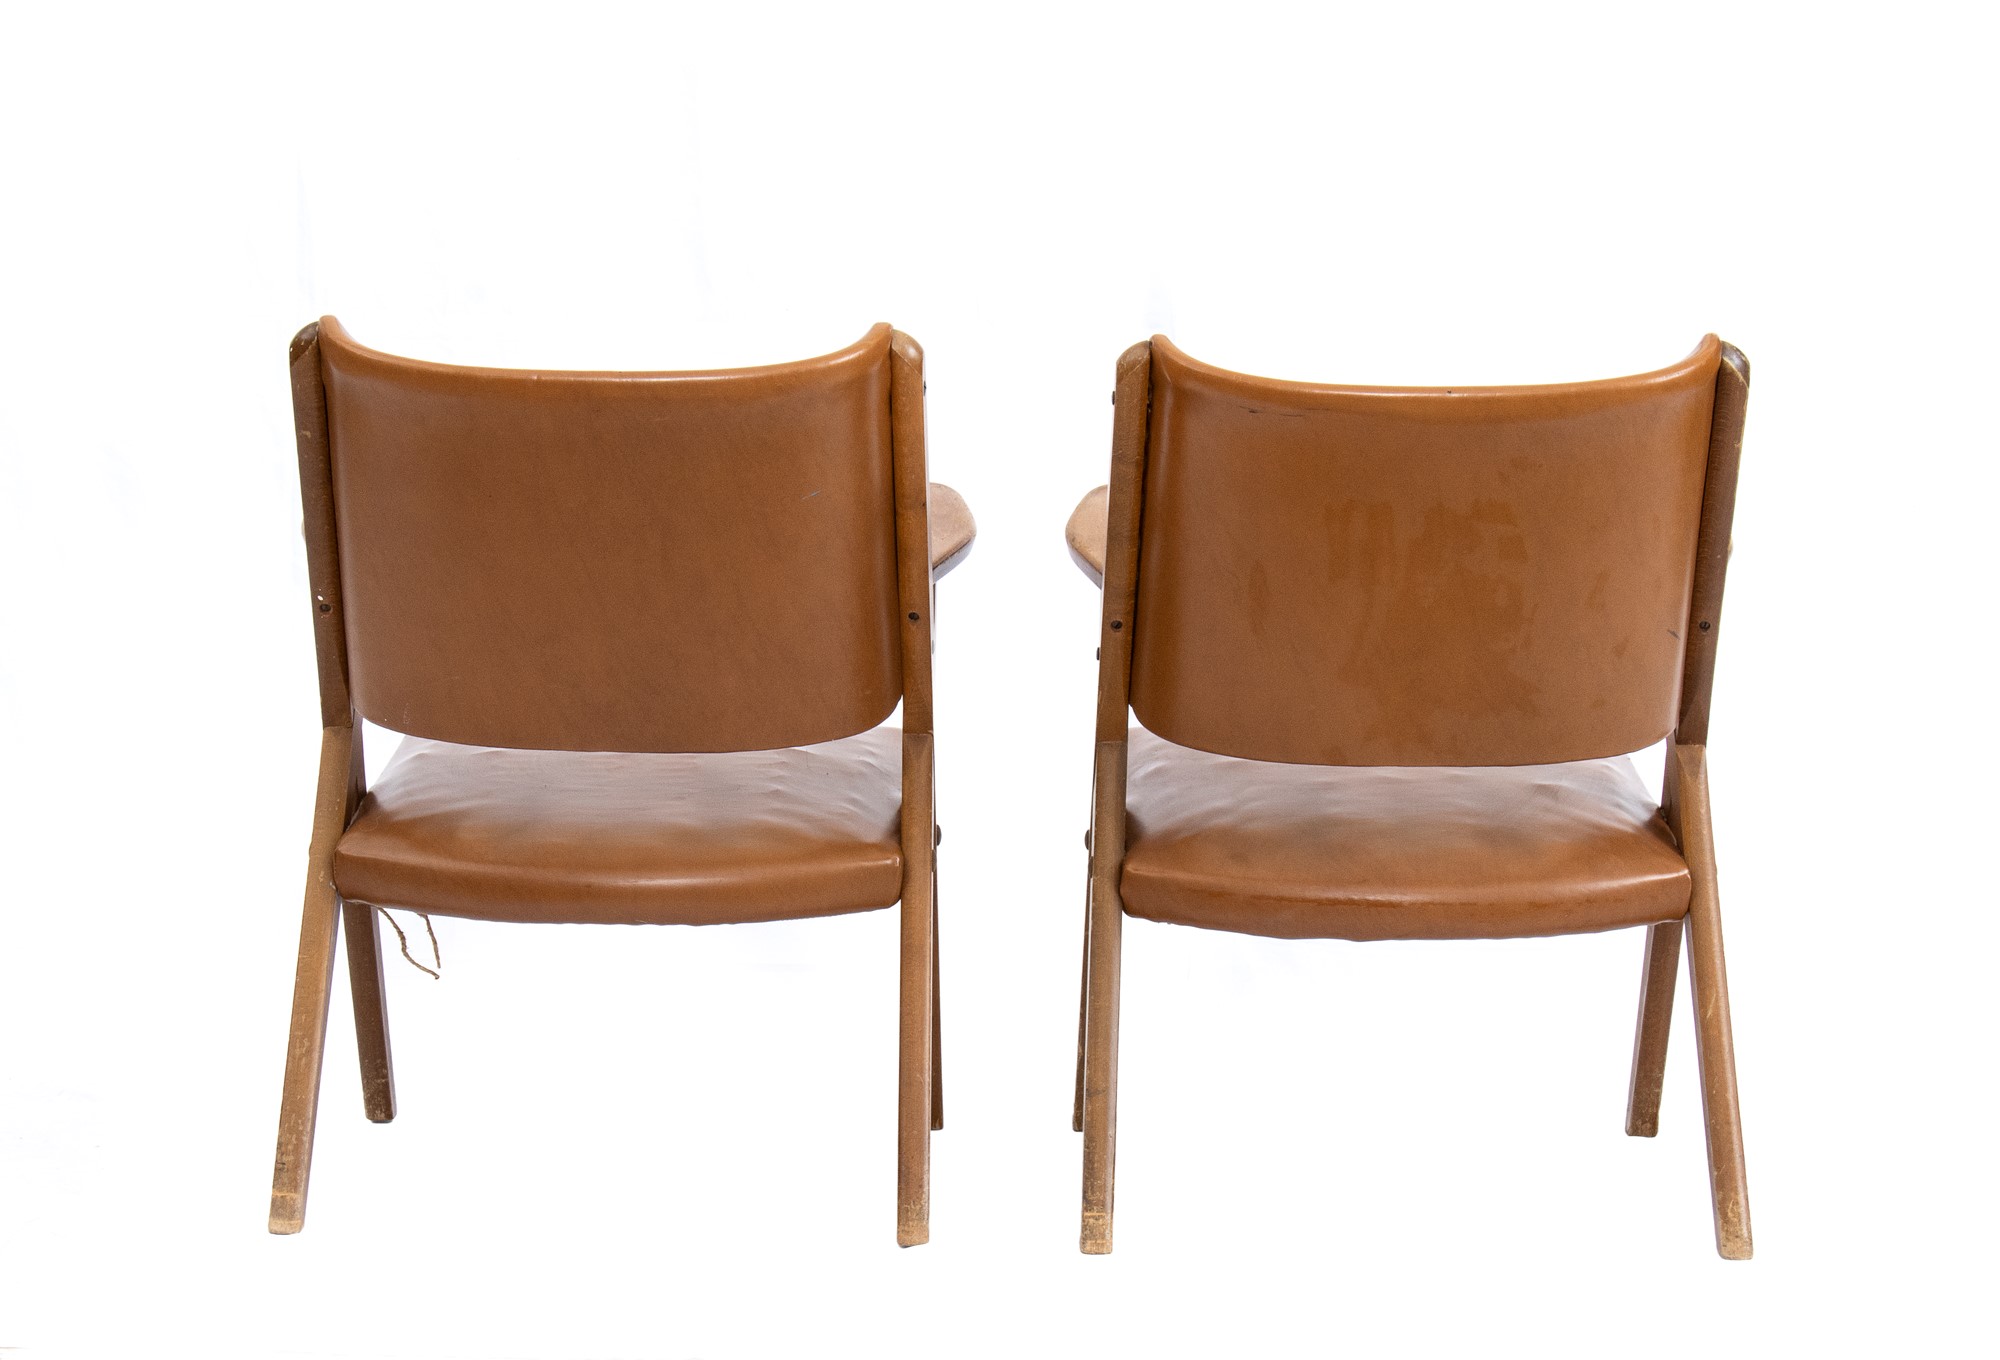 Dal Vera pair of armchairs with upholstered leather seats and backs - Image 13 of 17